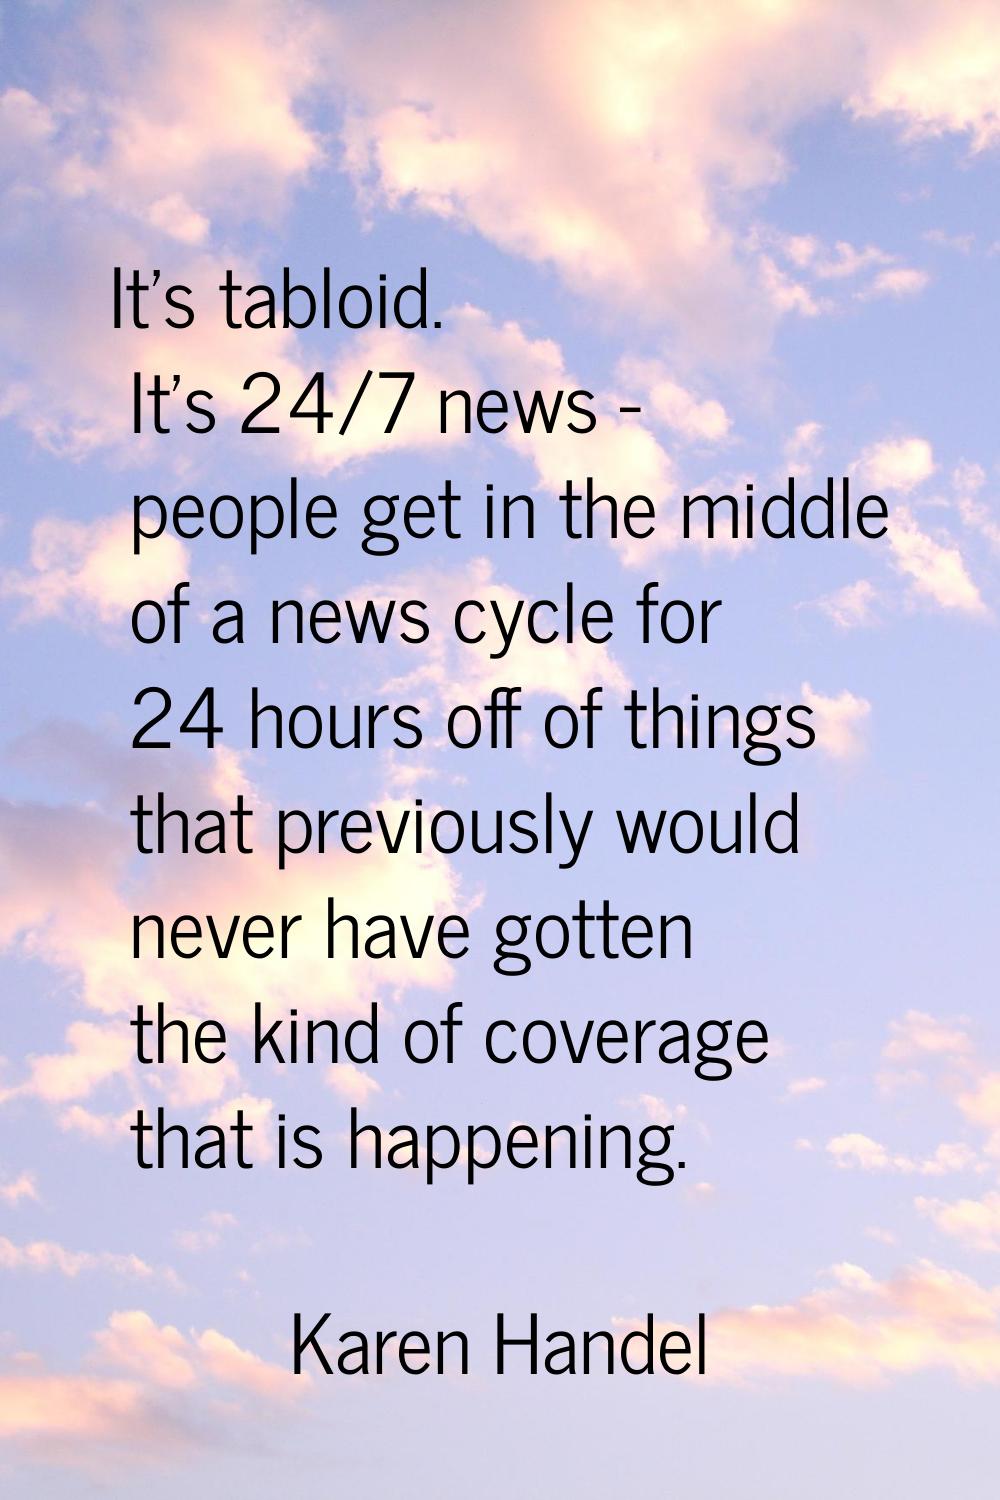 It's tabloid. It's 24/7 news - people get in the middle of a news cycle for 24 hours off of things 